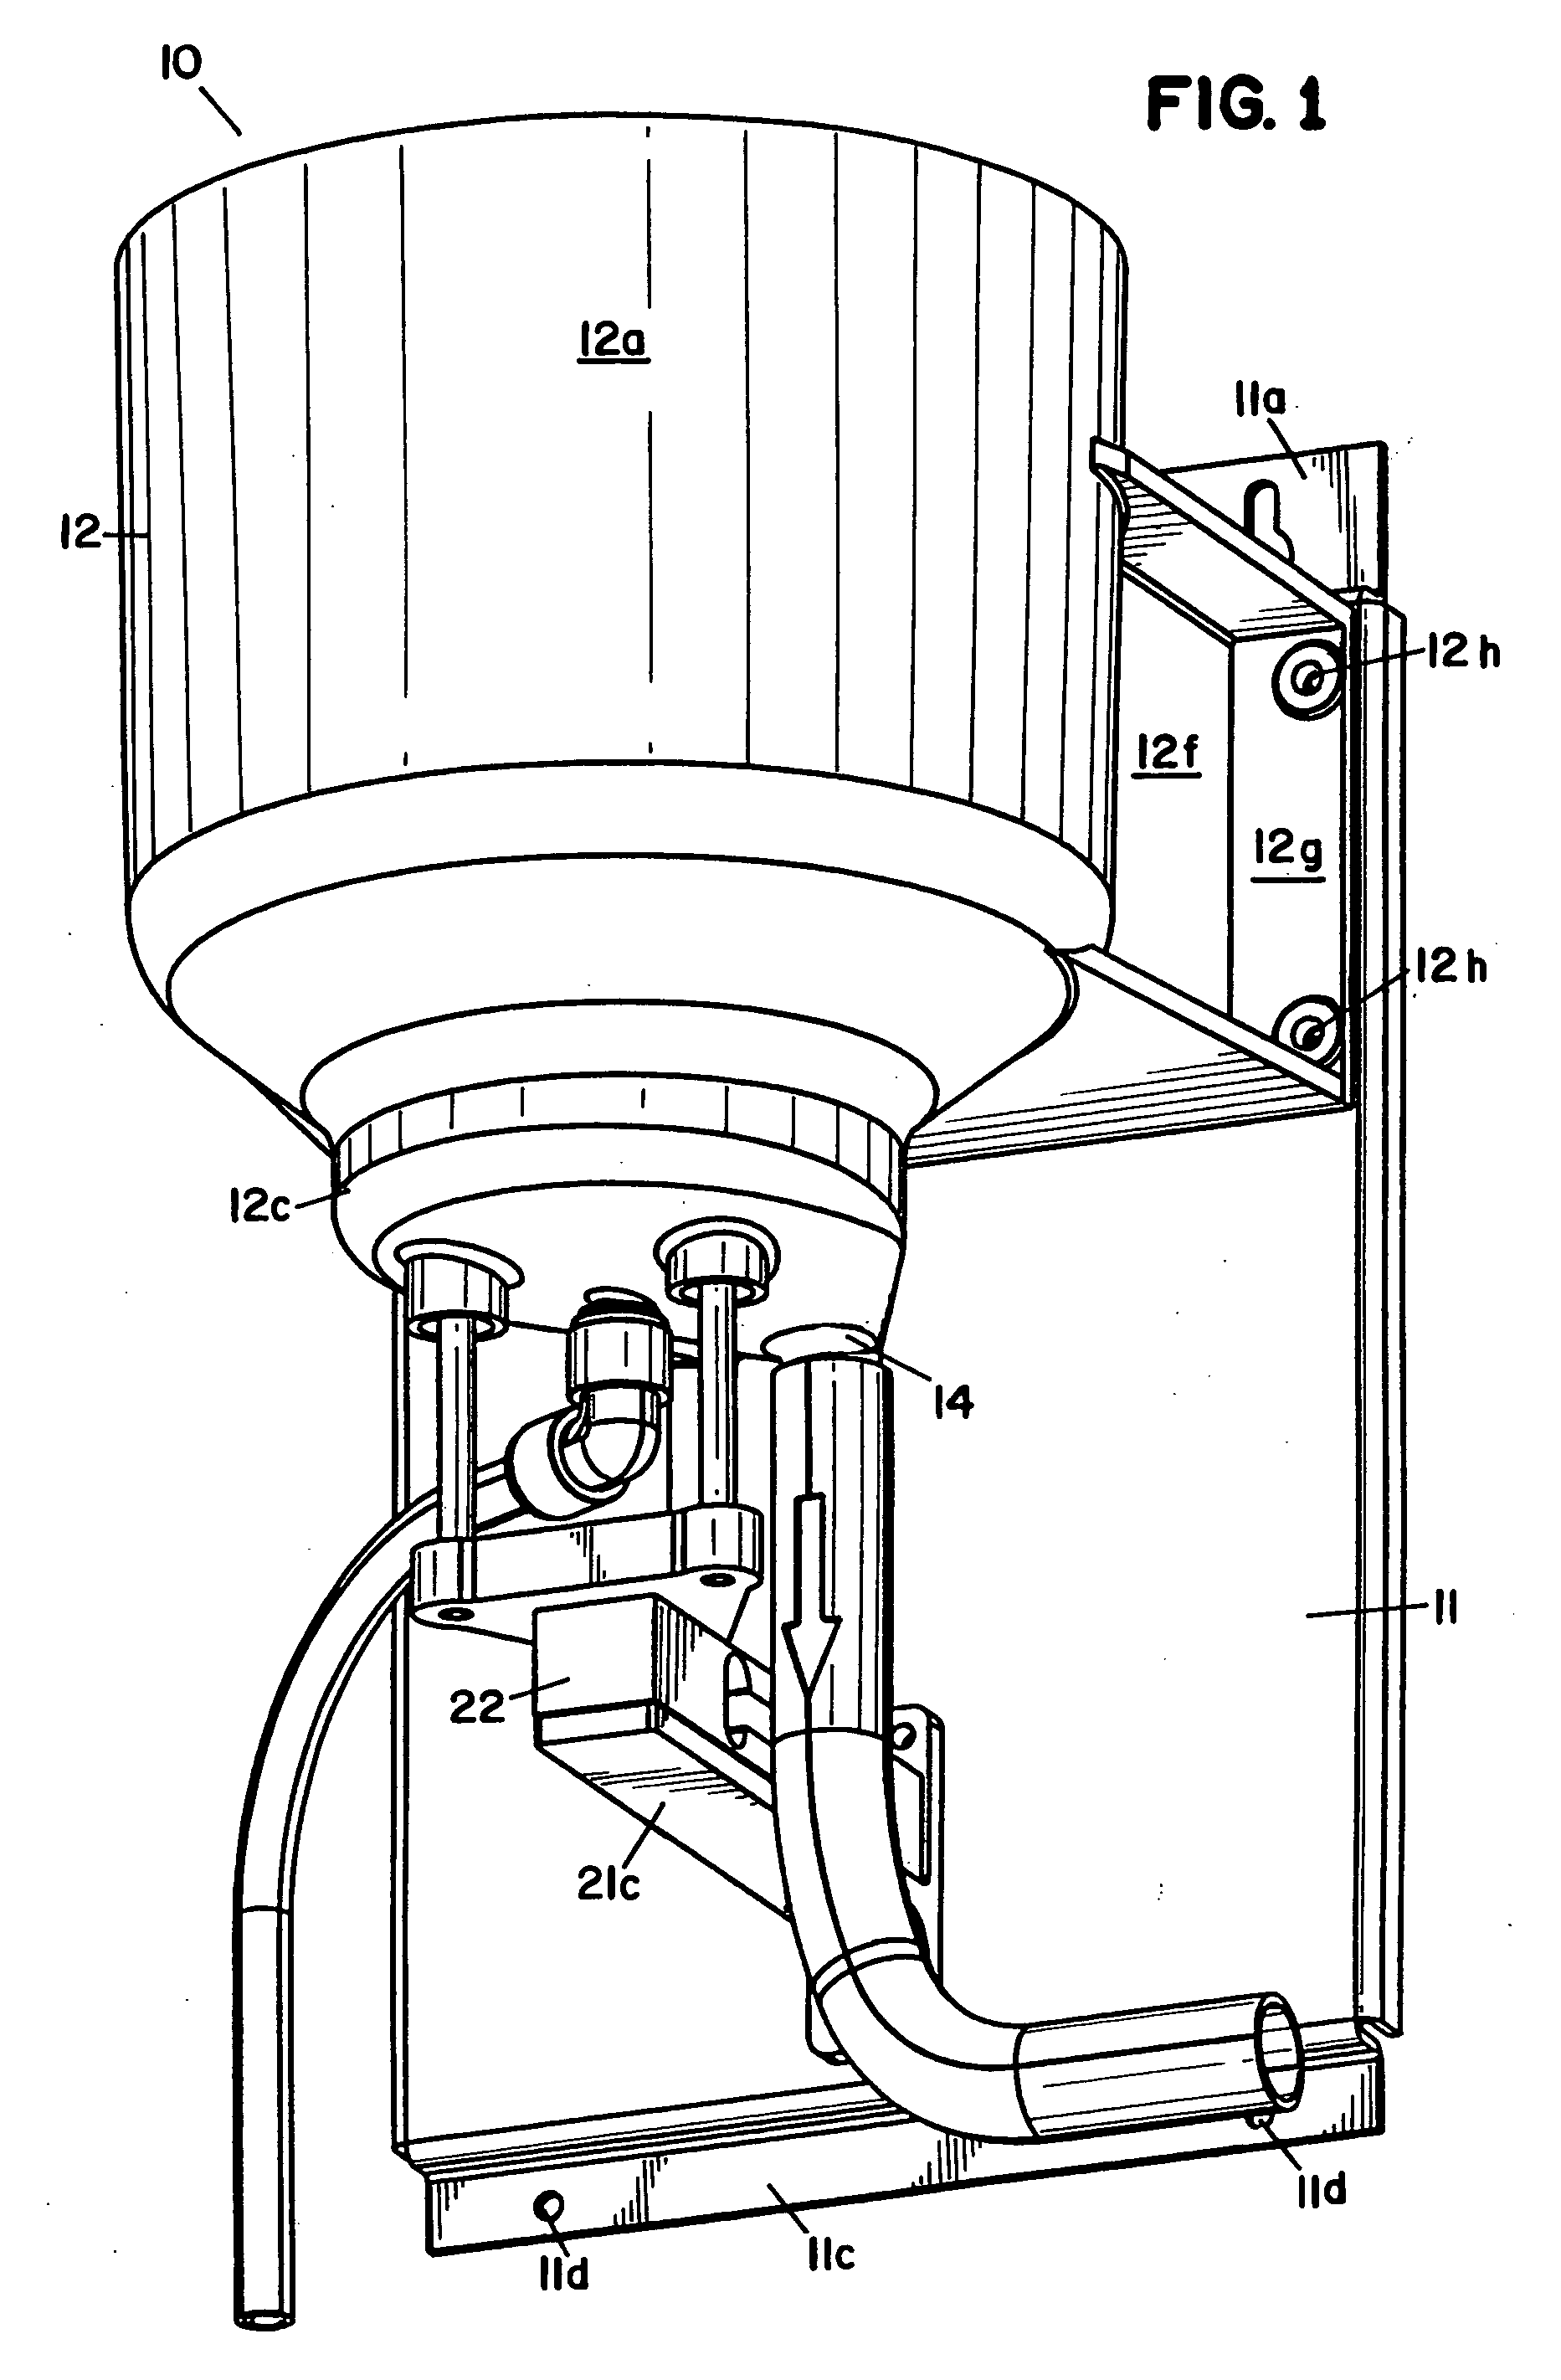 Method and apparatus for mass based dispensing